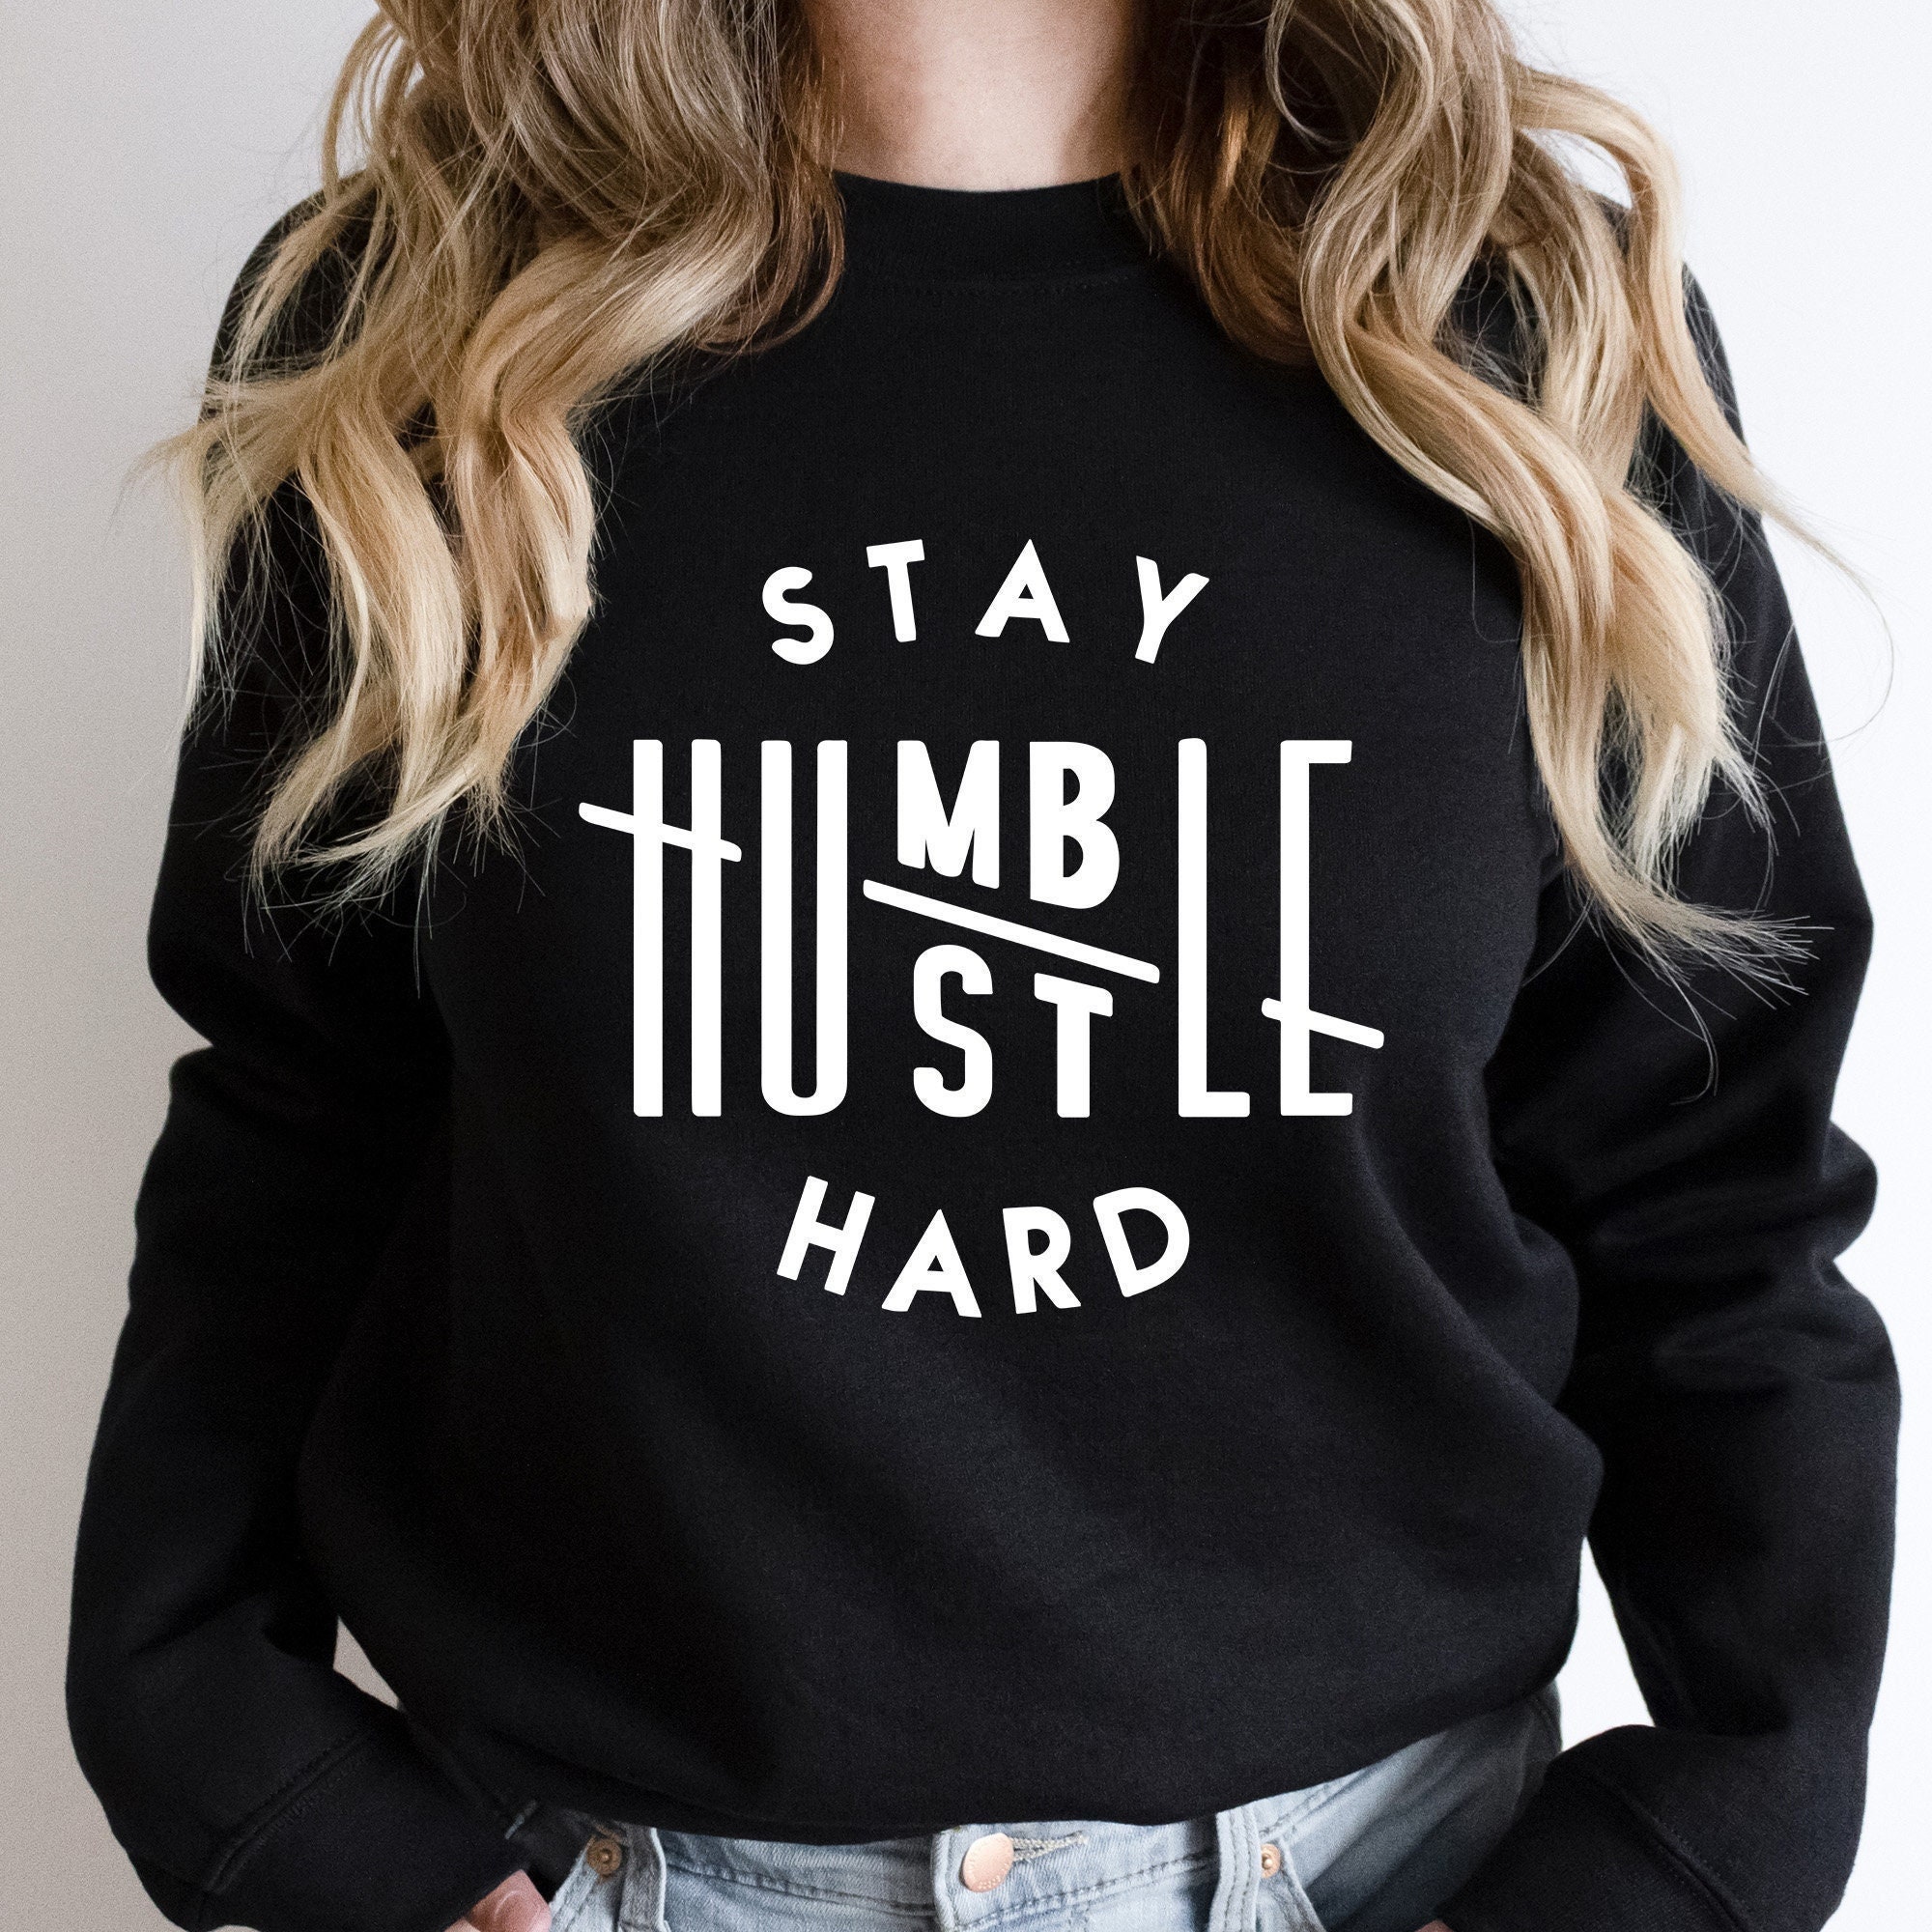 Stay Humble Hustle Hard Hoodie, Motivational Gear, Positive Sweatshirt,  Hoodies with Quotes, Inspiration Apparel, Sweatshirts with Hood